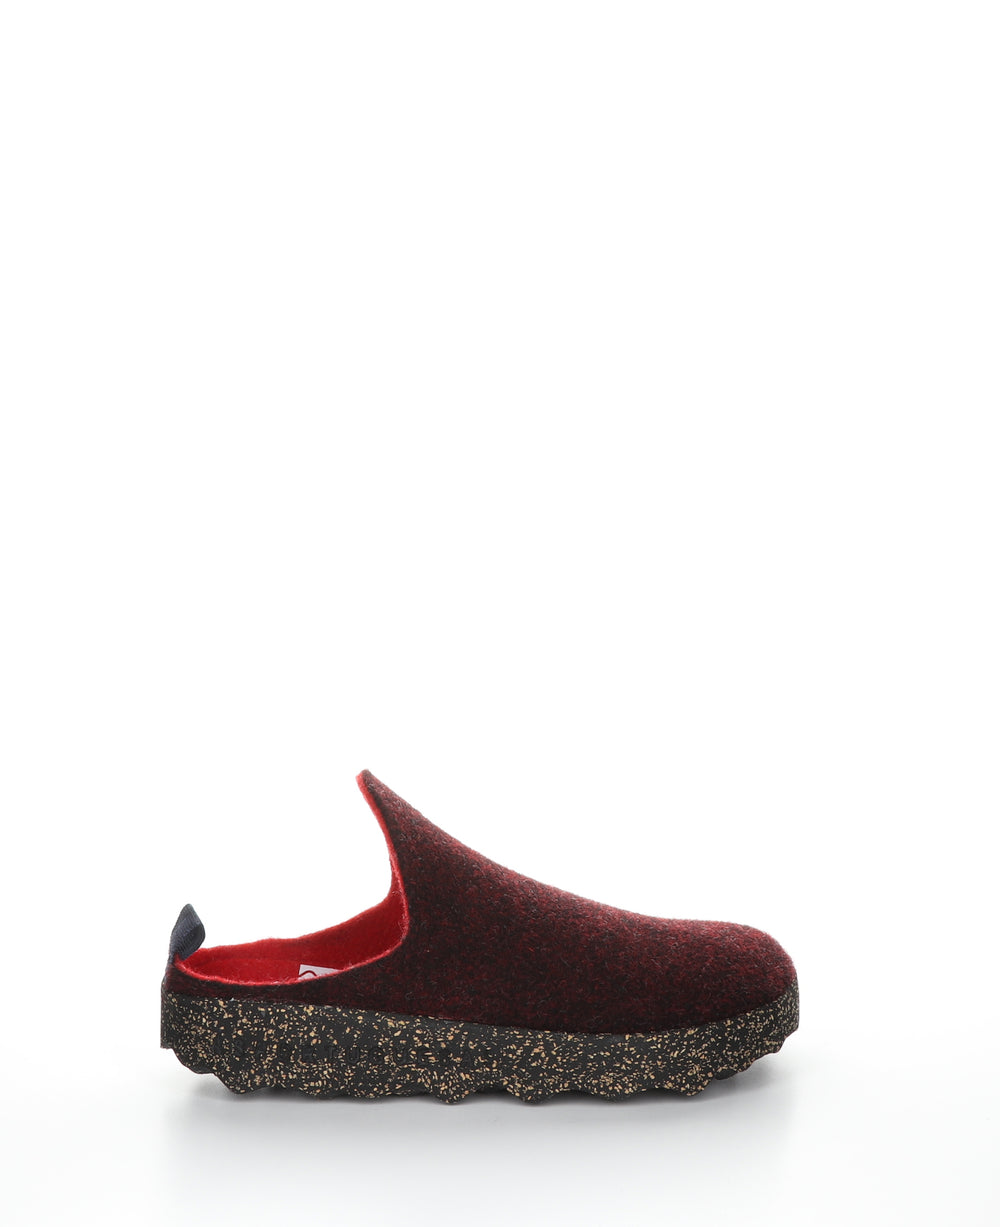 COME023ASP Merlot Round Toe Shoes|COME023ASP Chaussures à Bout Rond in Rouge